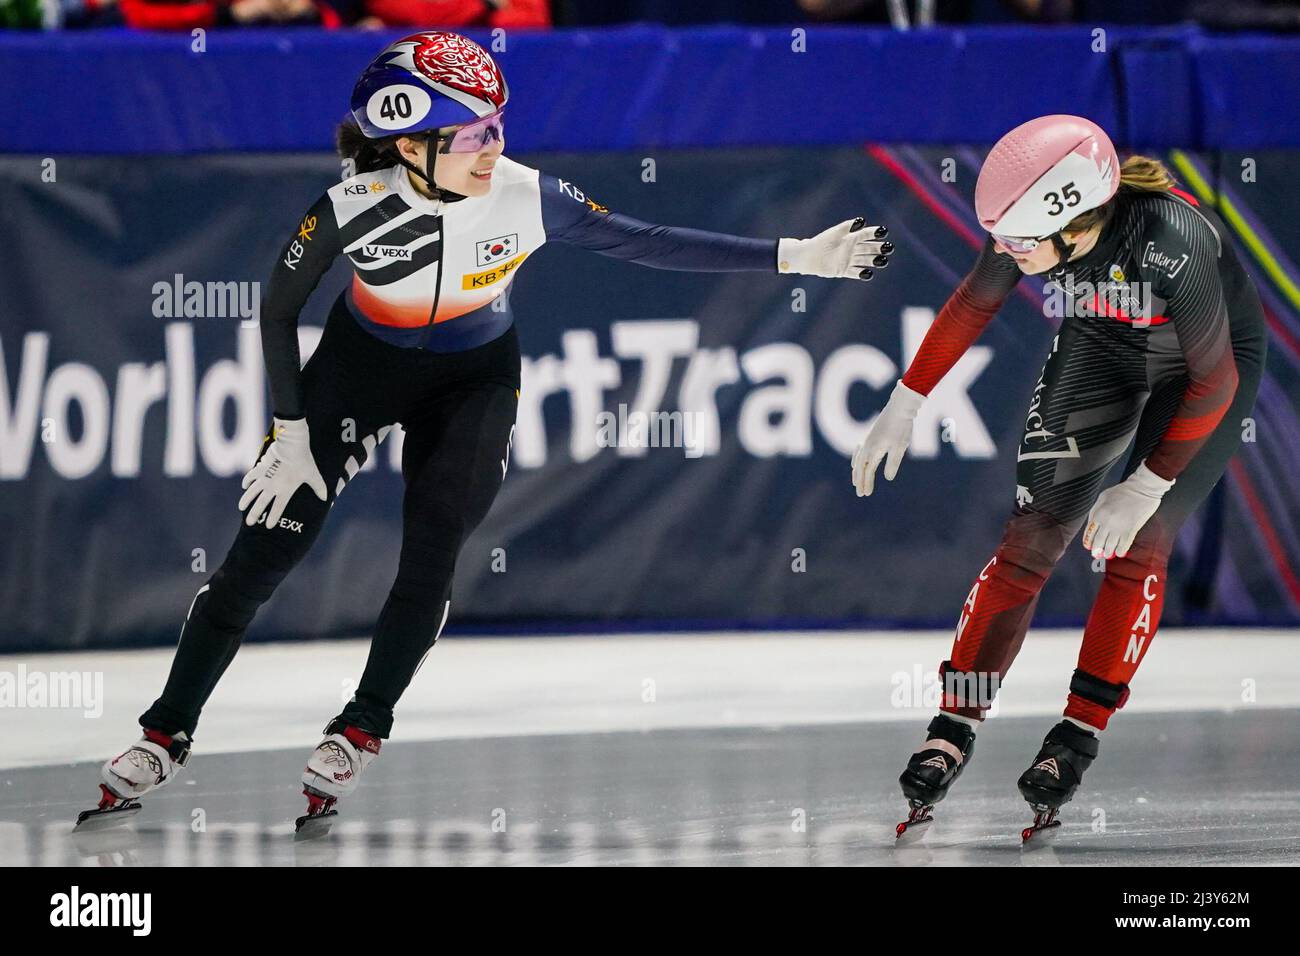 MONTREAL, CANADA - APRIL 10: Minjeong Choi of the Republic of Korea and Kim Boutin of Canada during Day 3 of the ISU World Short Track Championships at the Maurice Richard Arena on April 10, 2022 in Montreal, Canada (Photo by Andre Weening/Orange Pictures) Stock Photo